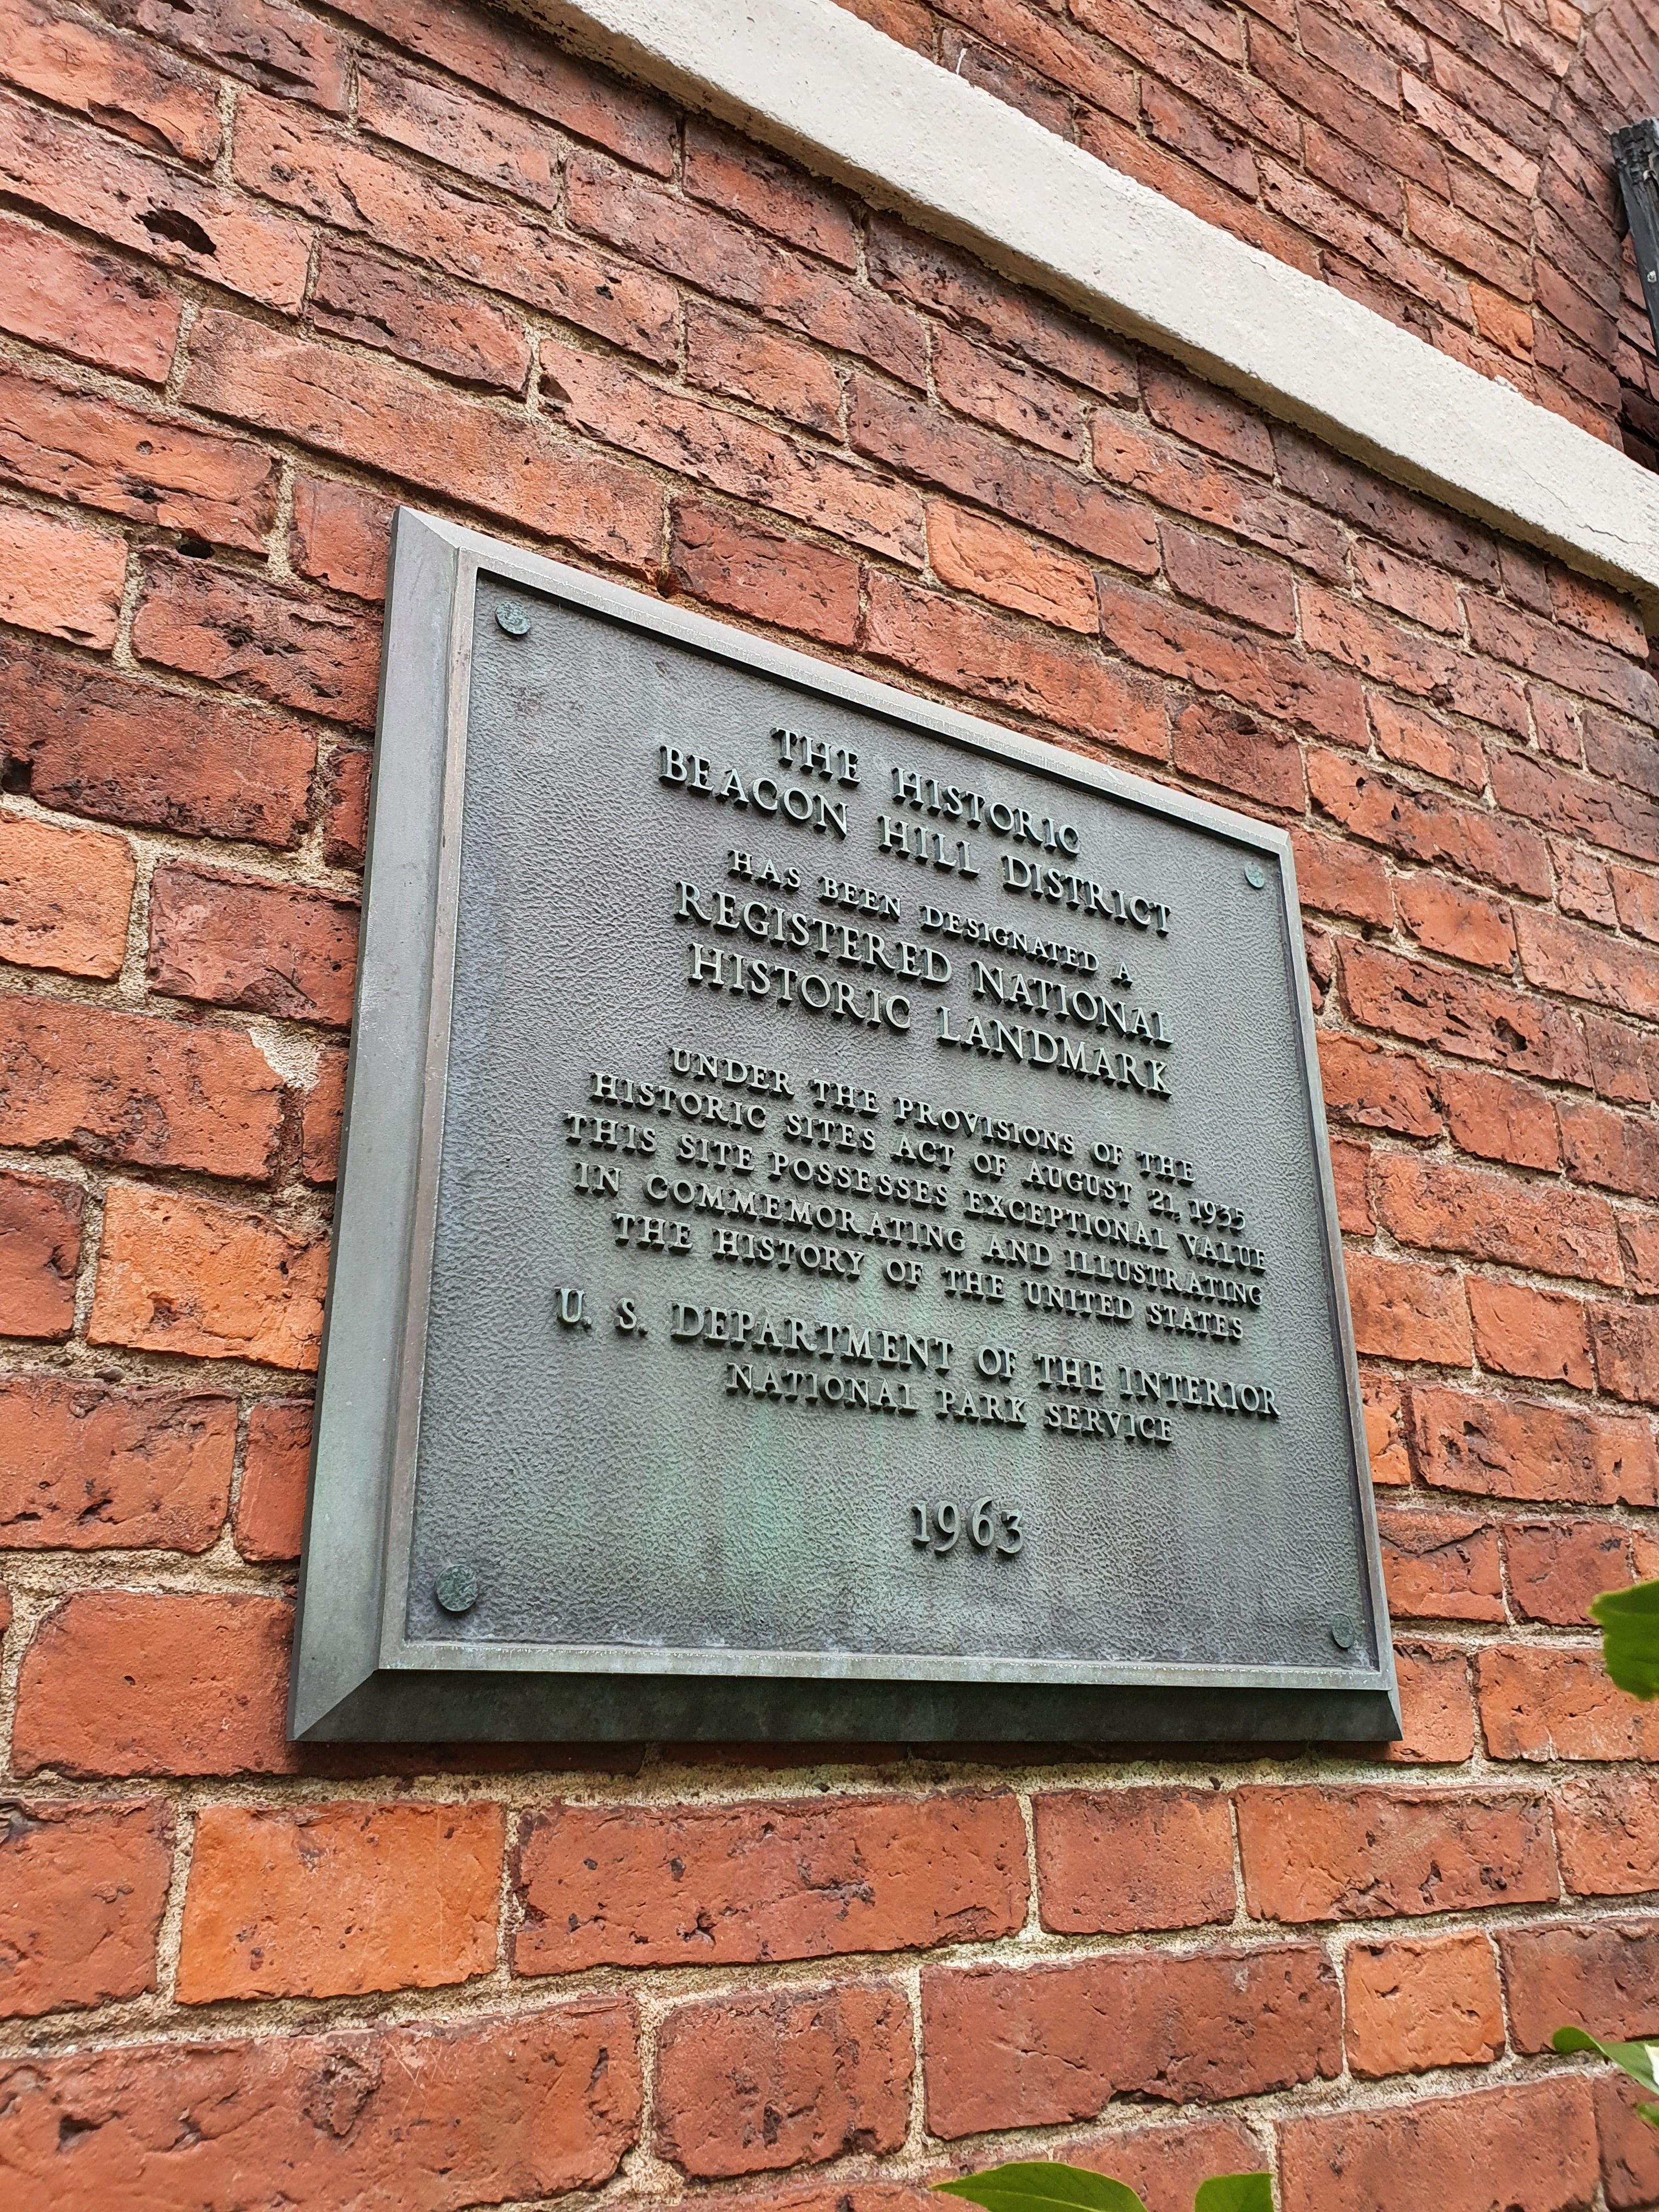 The Historic Beacon Hill District Marker